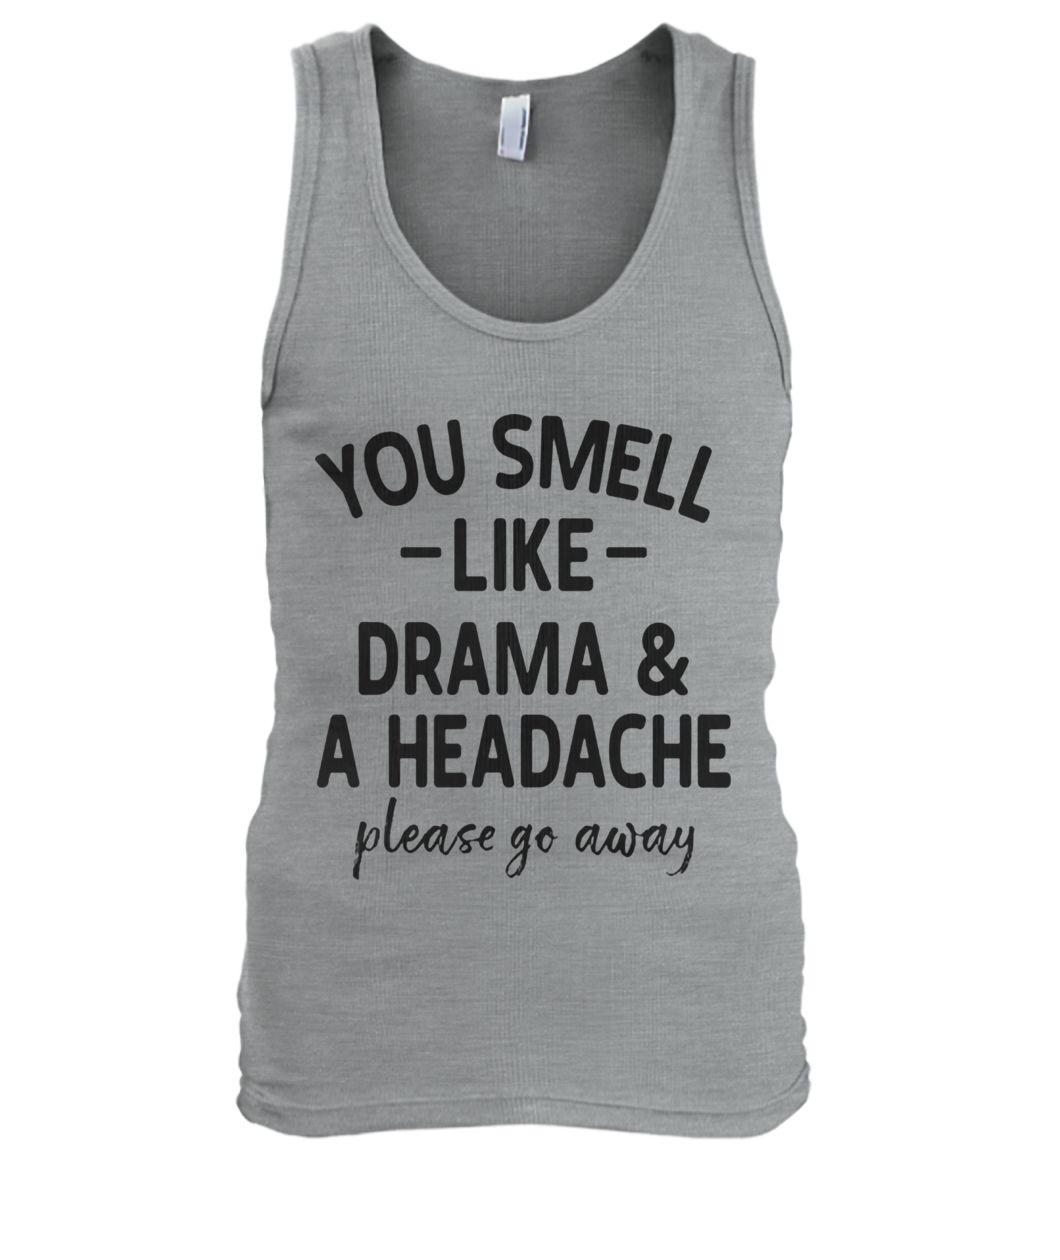 You smell like drama and a headache please go away men's tank top